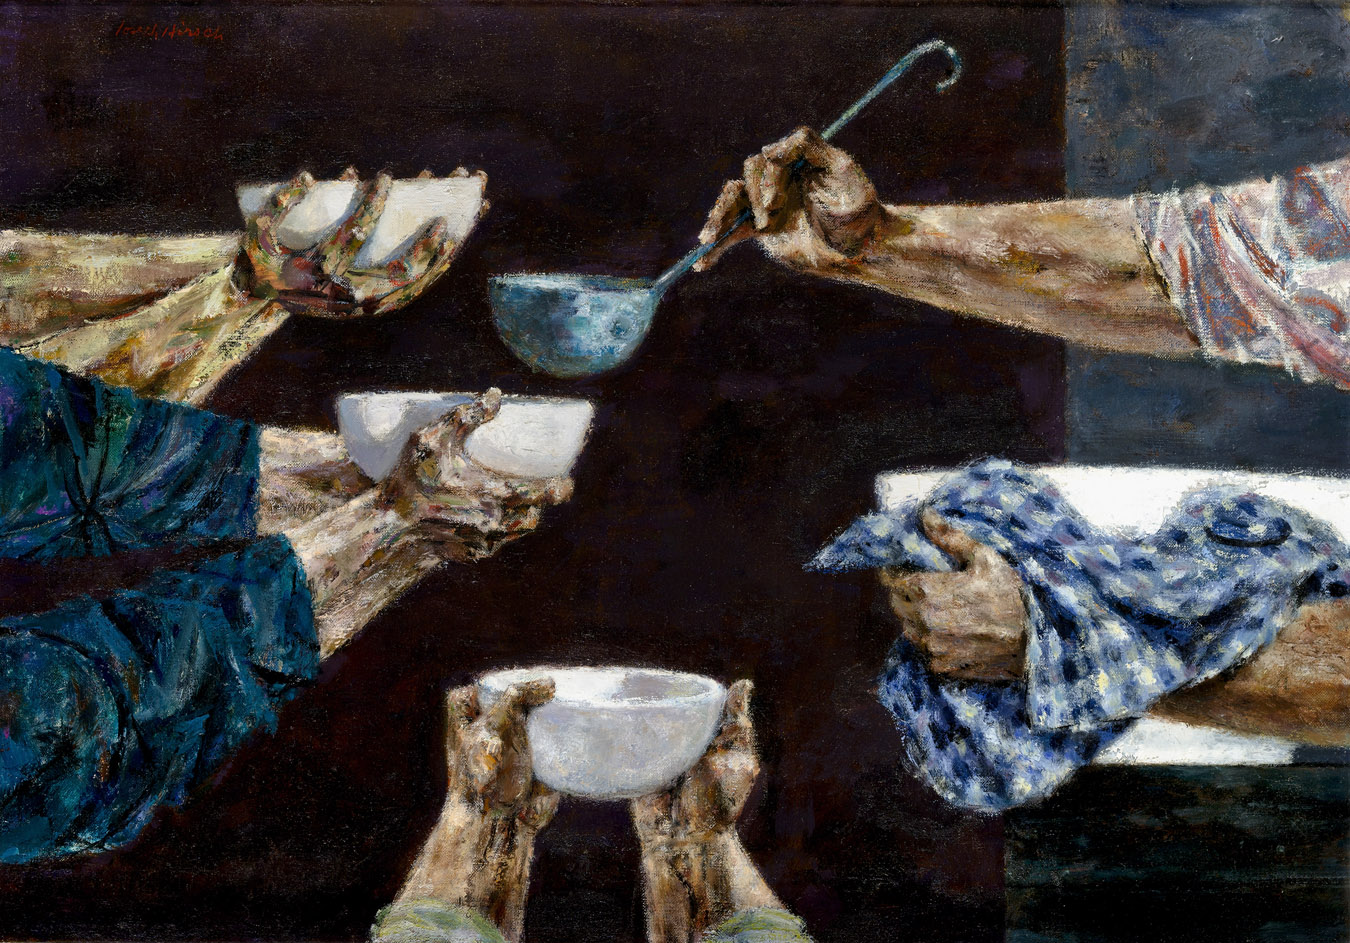 This image depicts 4 hands reaching with bowls, while one person contains a ladle. Only arms and hands are visible in this picture. The image is gritty in its application of paint and lack of bright color.